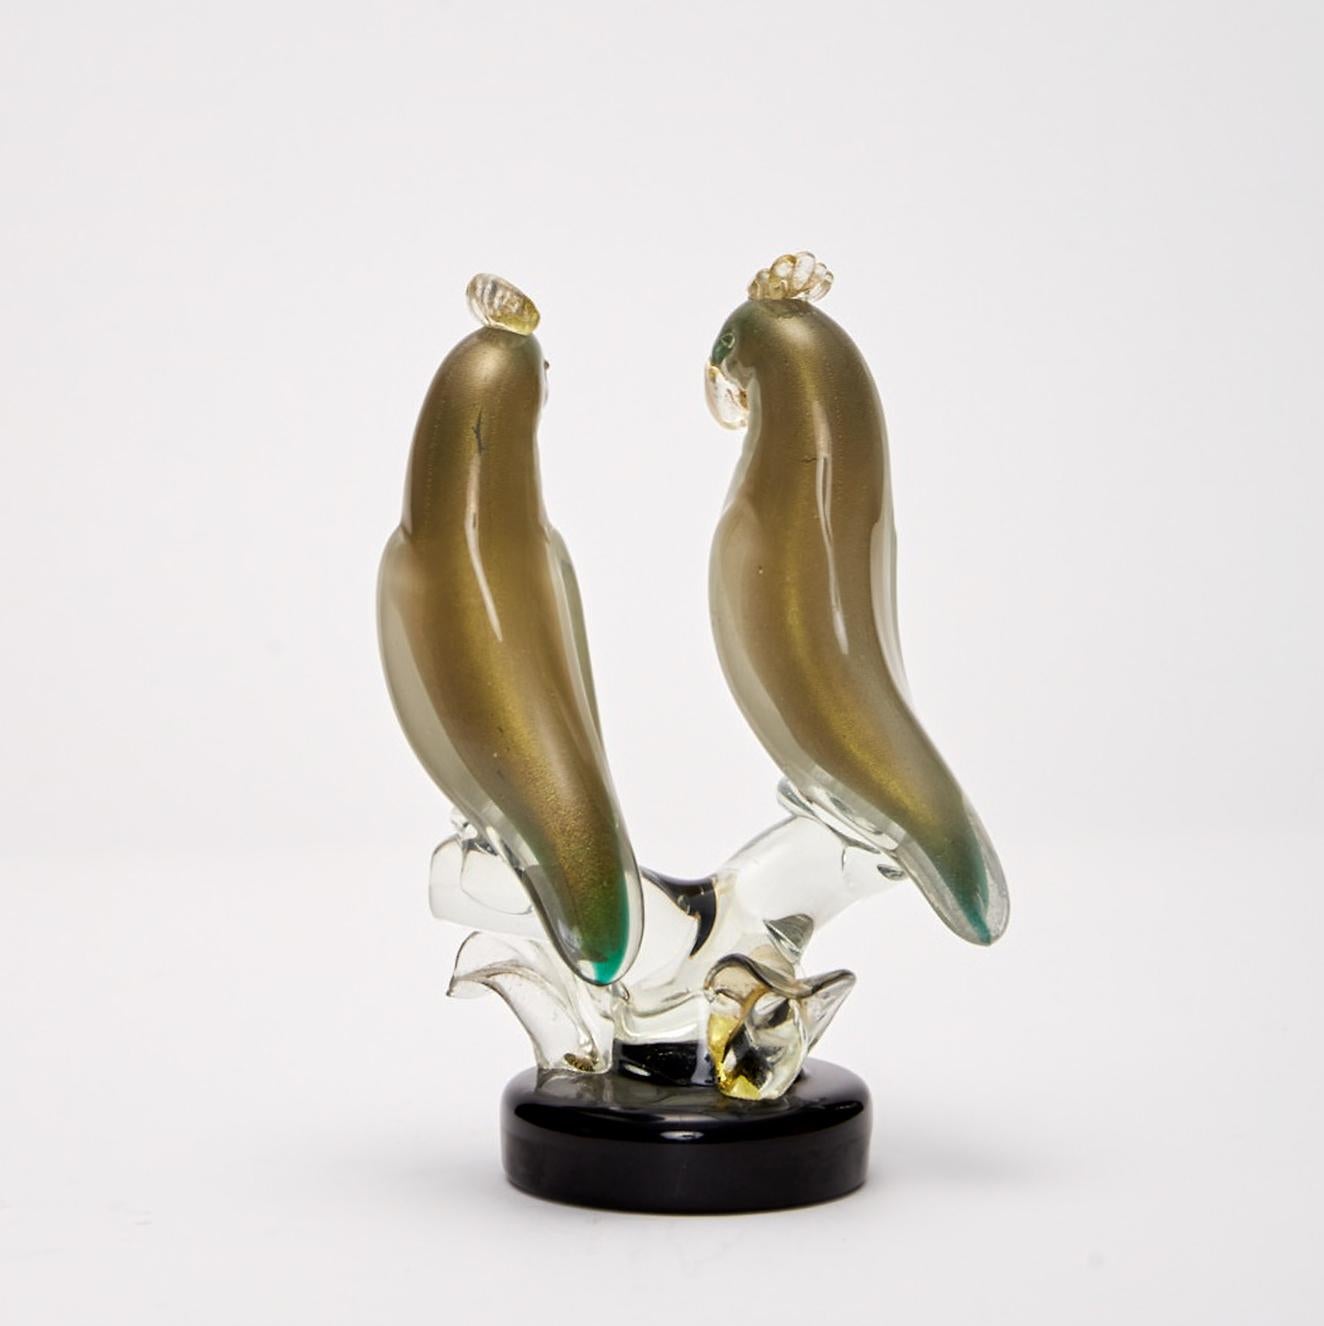 Italian Parrots Sculpture  by Alfredo Barbin 1950 's Applied Glass with Gold Powders  For Sale